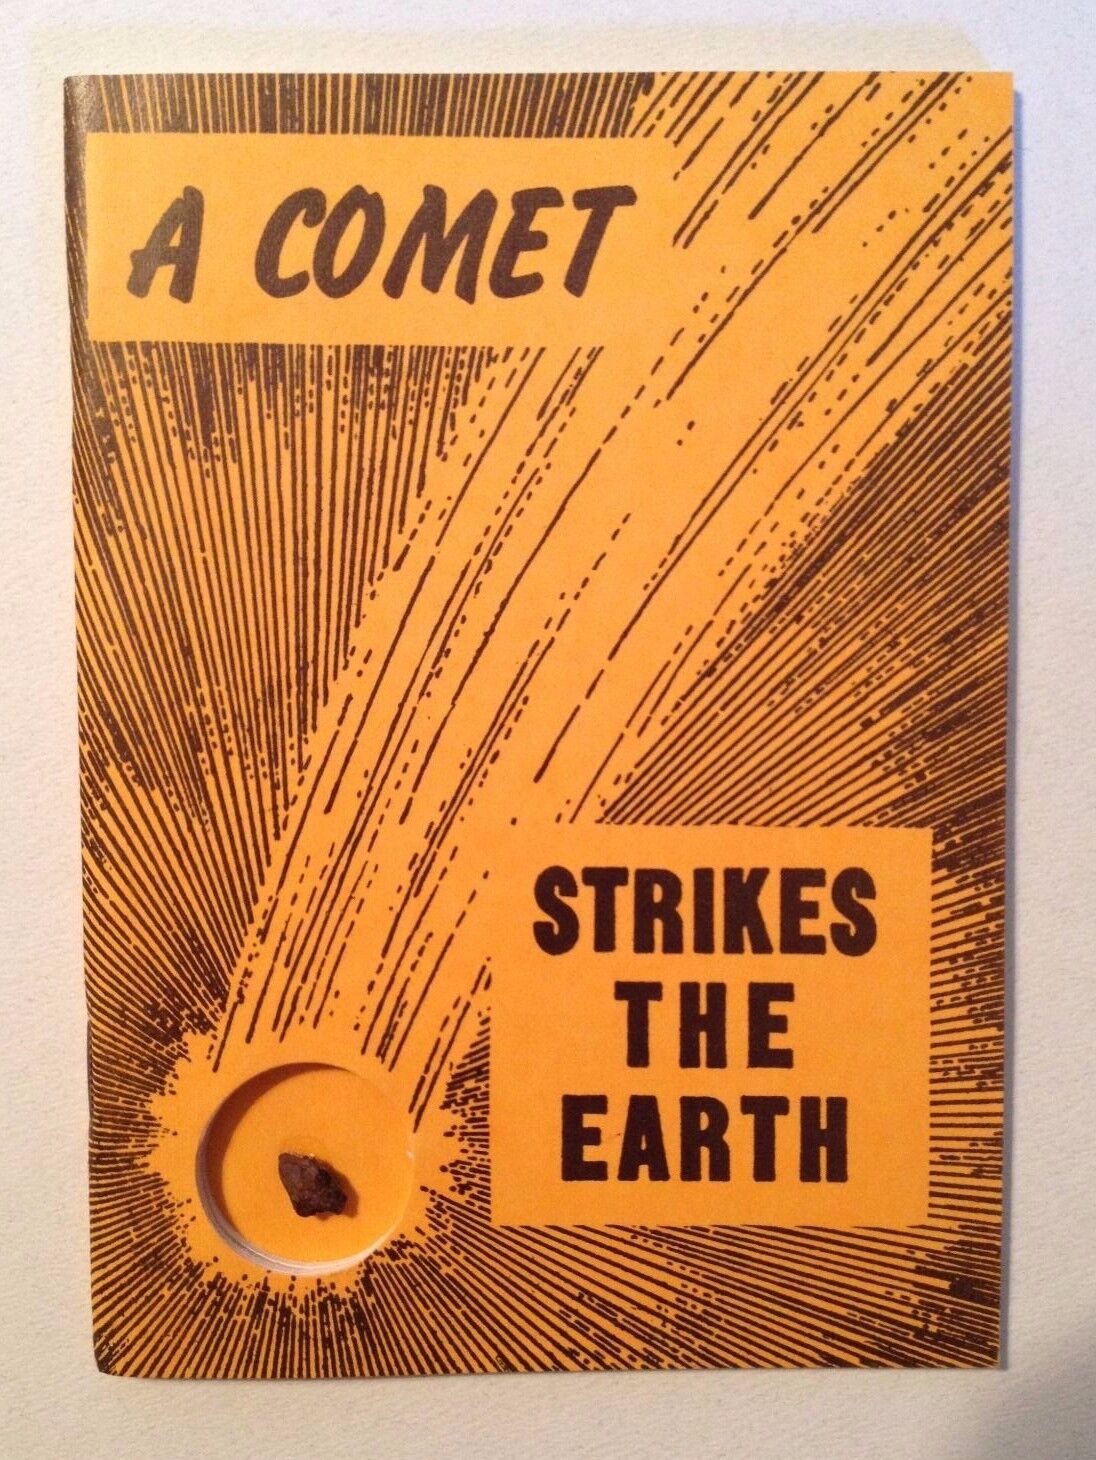 A Comet Strikes the Earth by Nininger (1969 reprint), with meteorite specimen